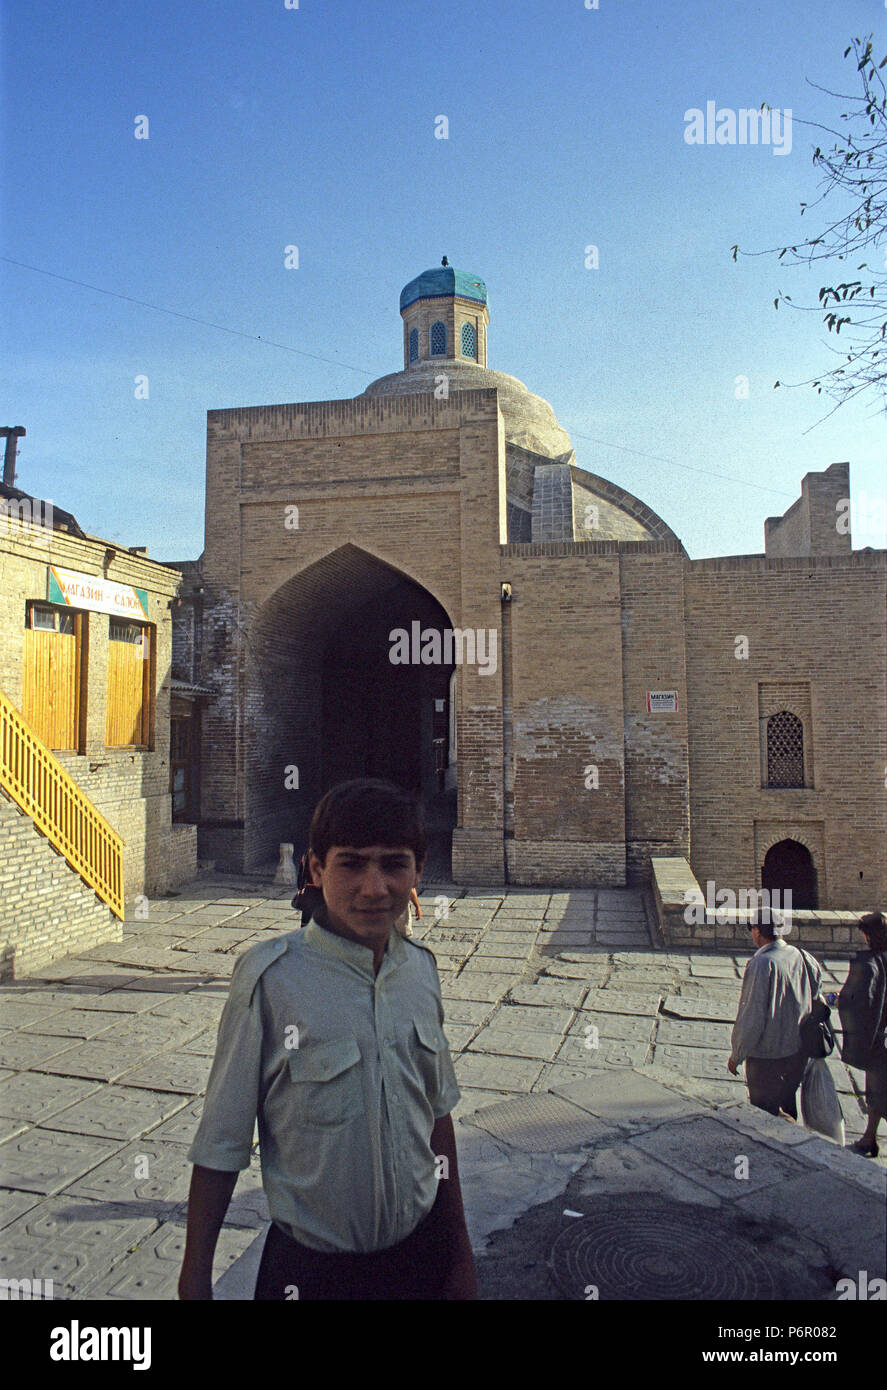 Curious Uzbek boy in the Old City of Bukhara, undated analogue photograph from October 1992. The historical, mostly Islamic center of Bukhara was declared a UNESCO World Heritage Site in 1993, and the state of Uzbekistan gained its independence after the collapse of the Soviet Union on 01.09.1991. Photo: Matthias Toedt/dpa central image/ZB/picture alliance | usage worldwide Stock Photo